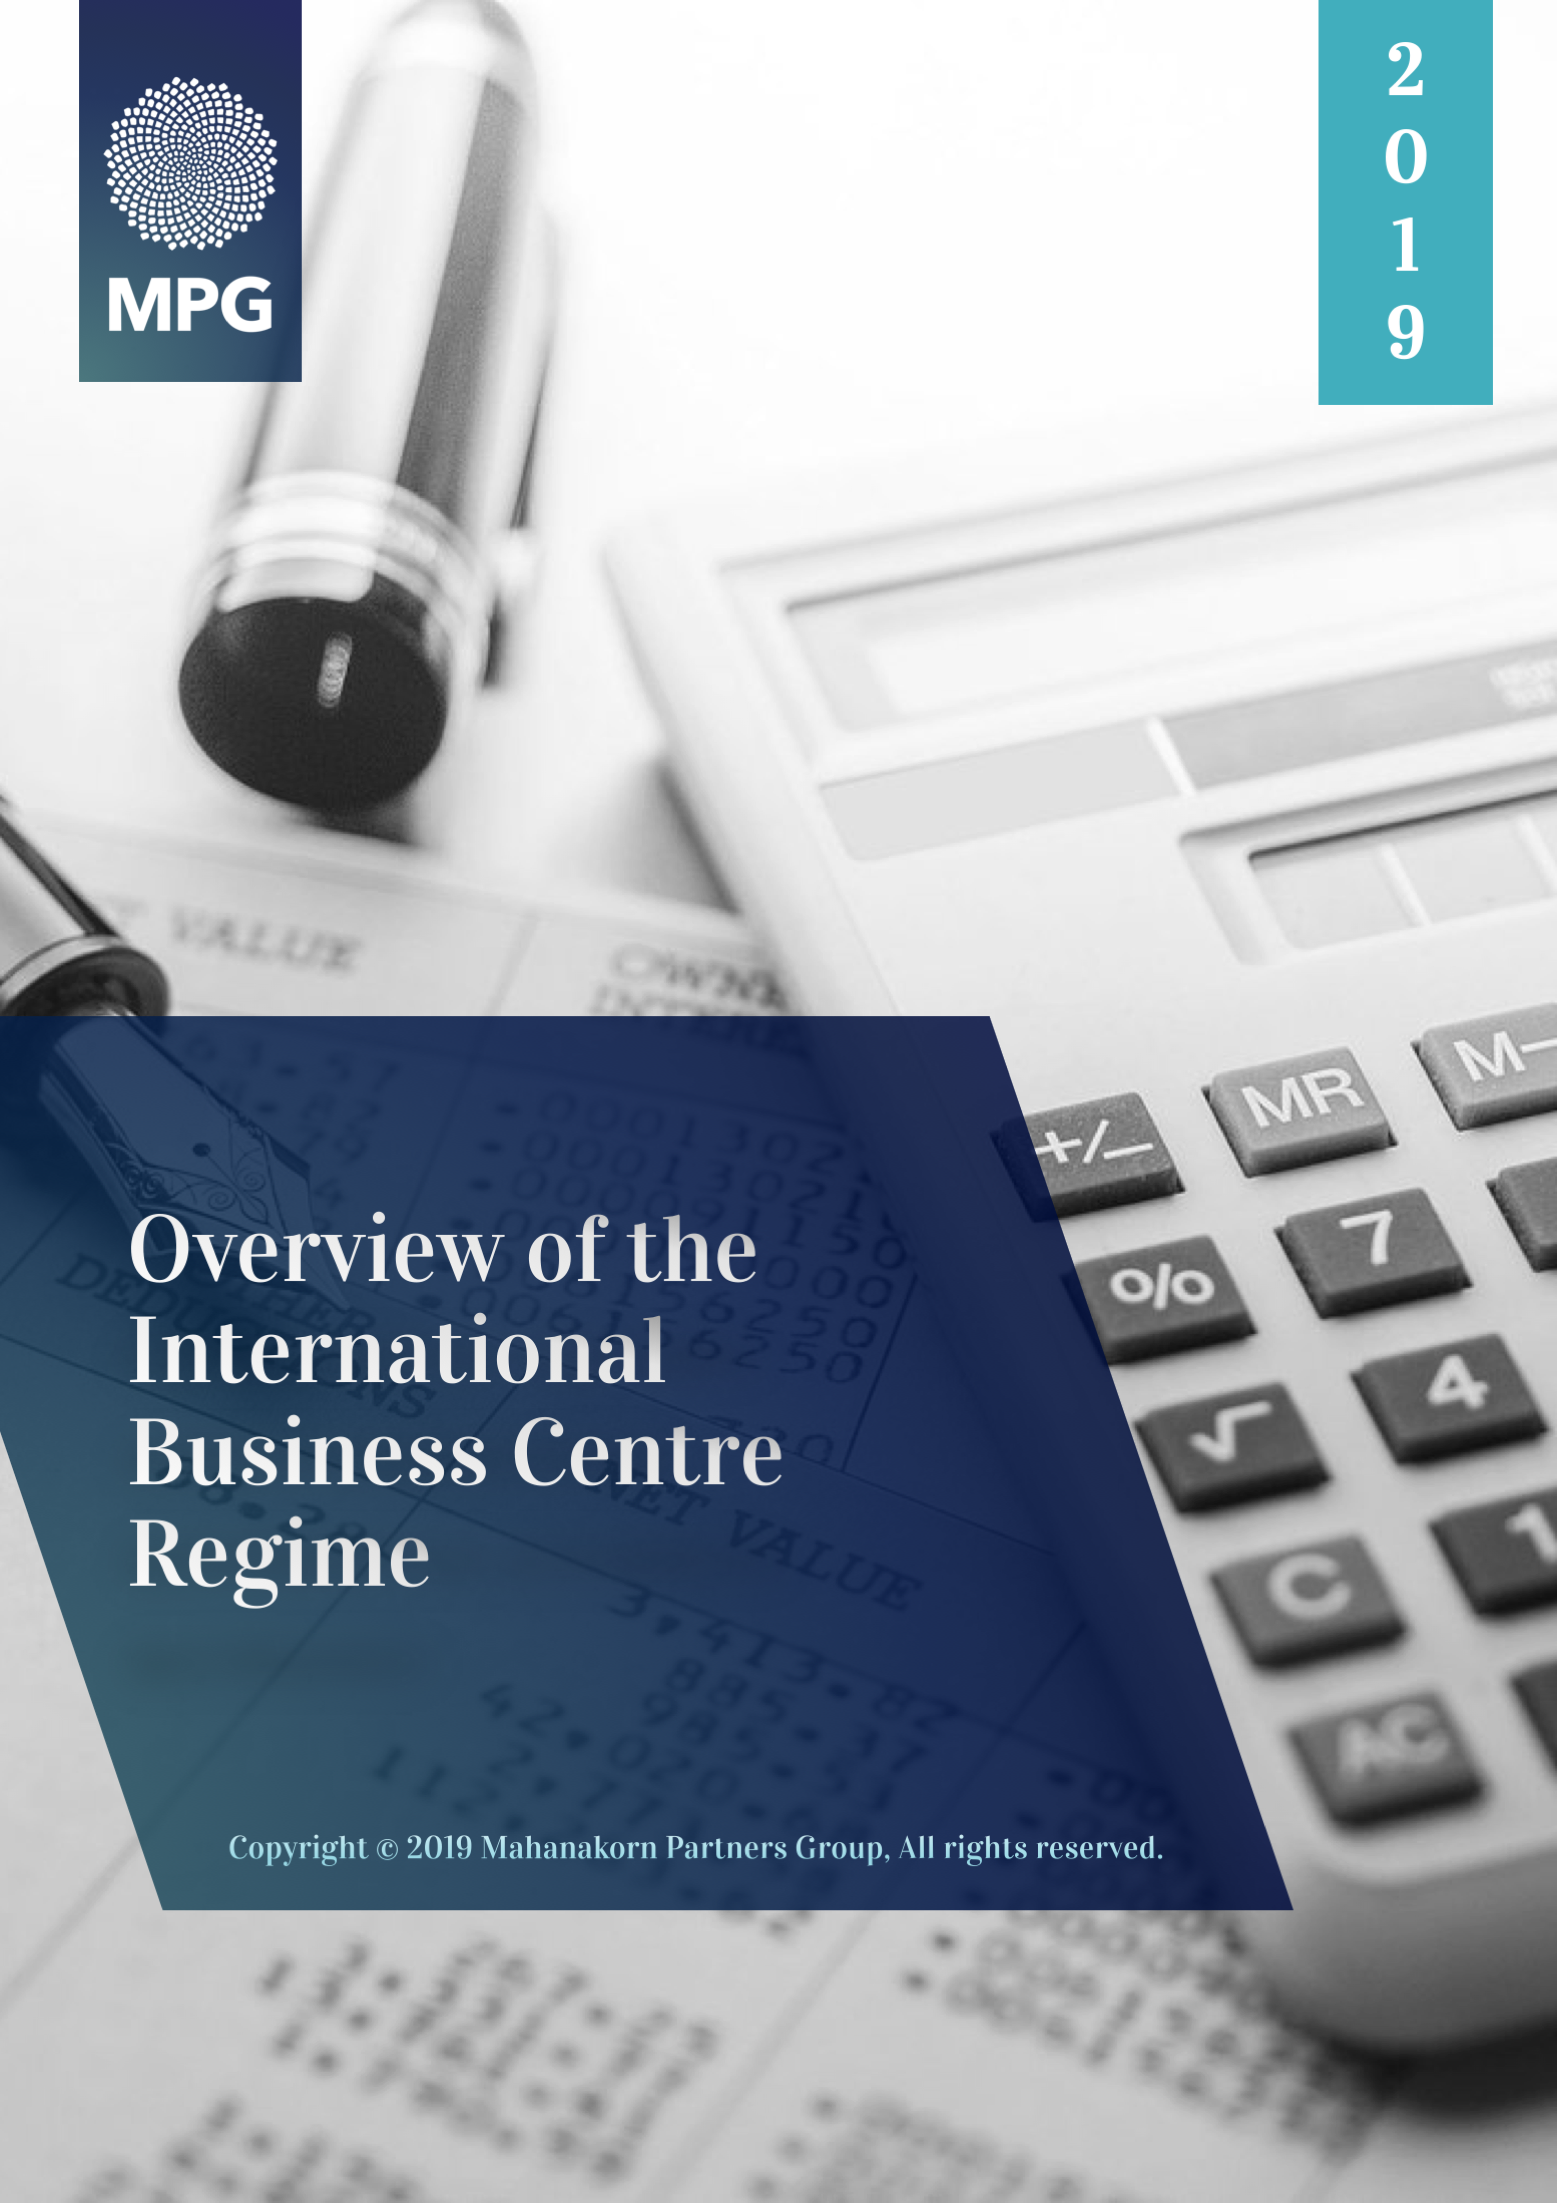 Overview of the International Business Centre Regime